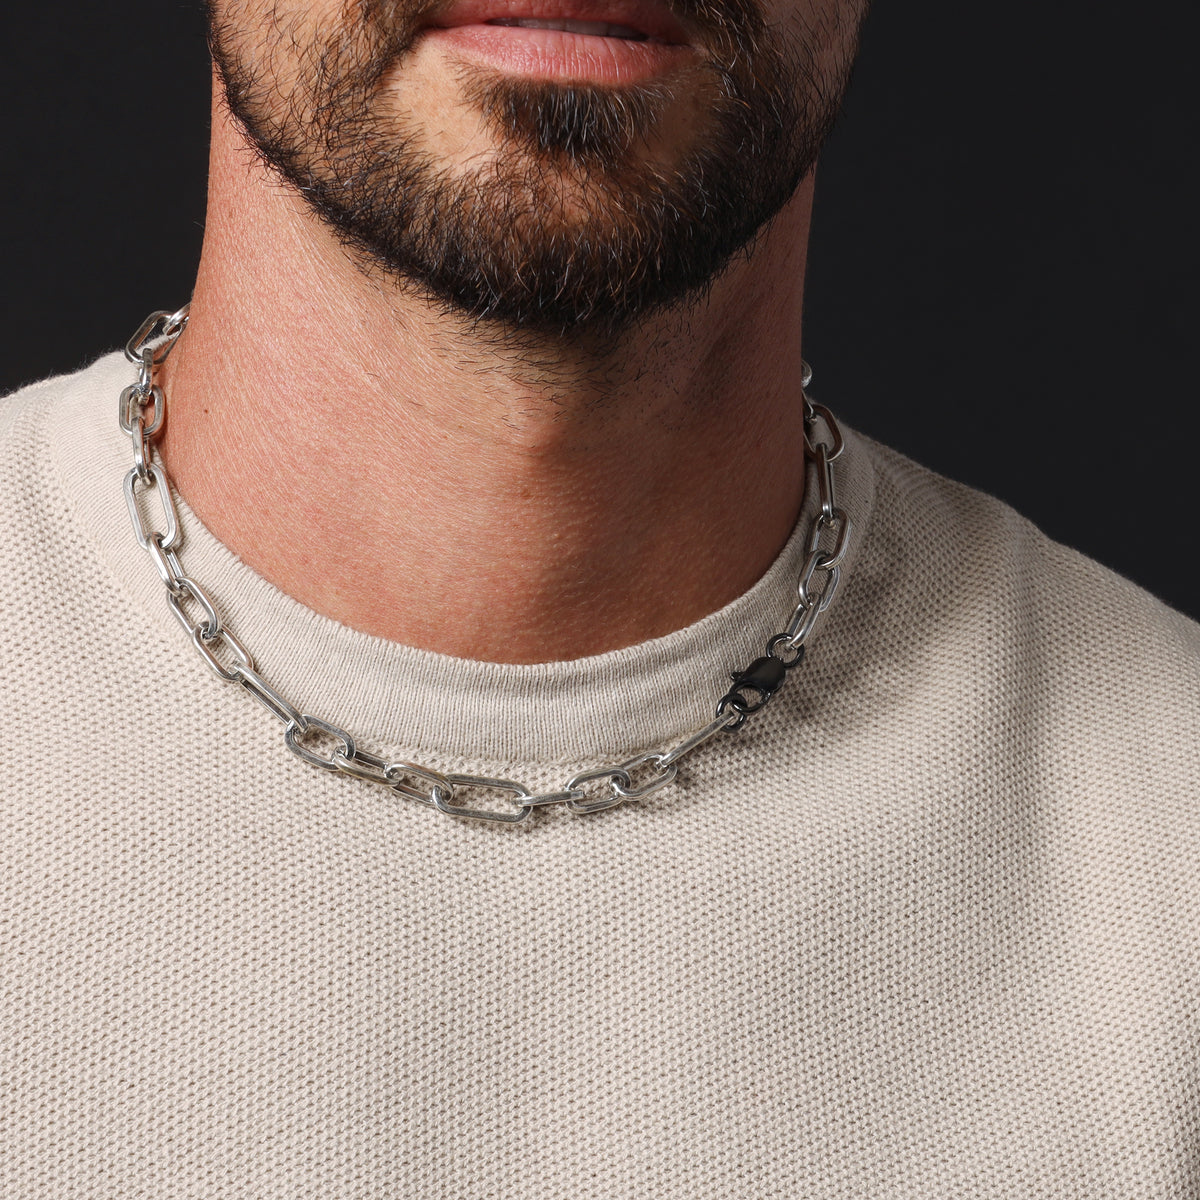 925 Oxidized Sterling Silver Collar Inspired Chain Necklace for Men